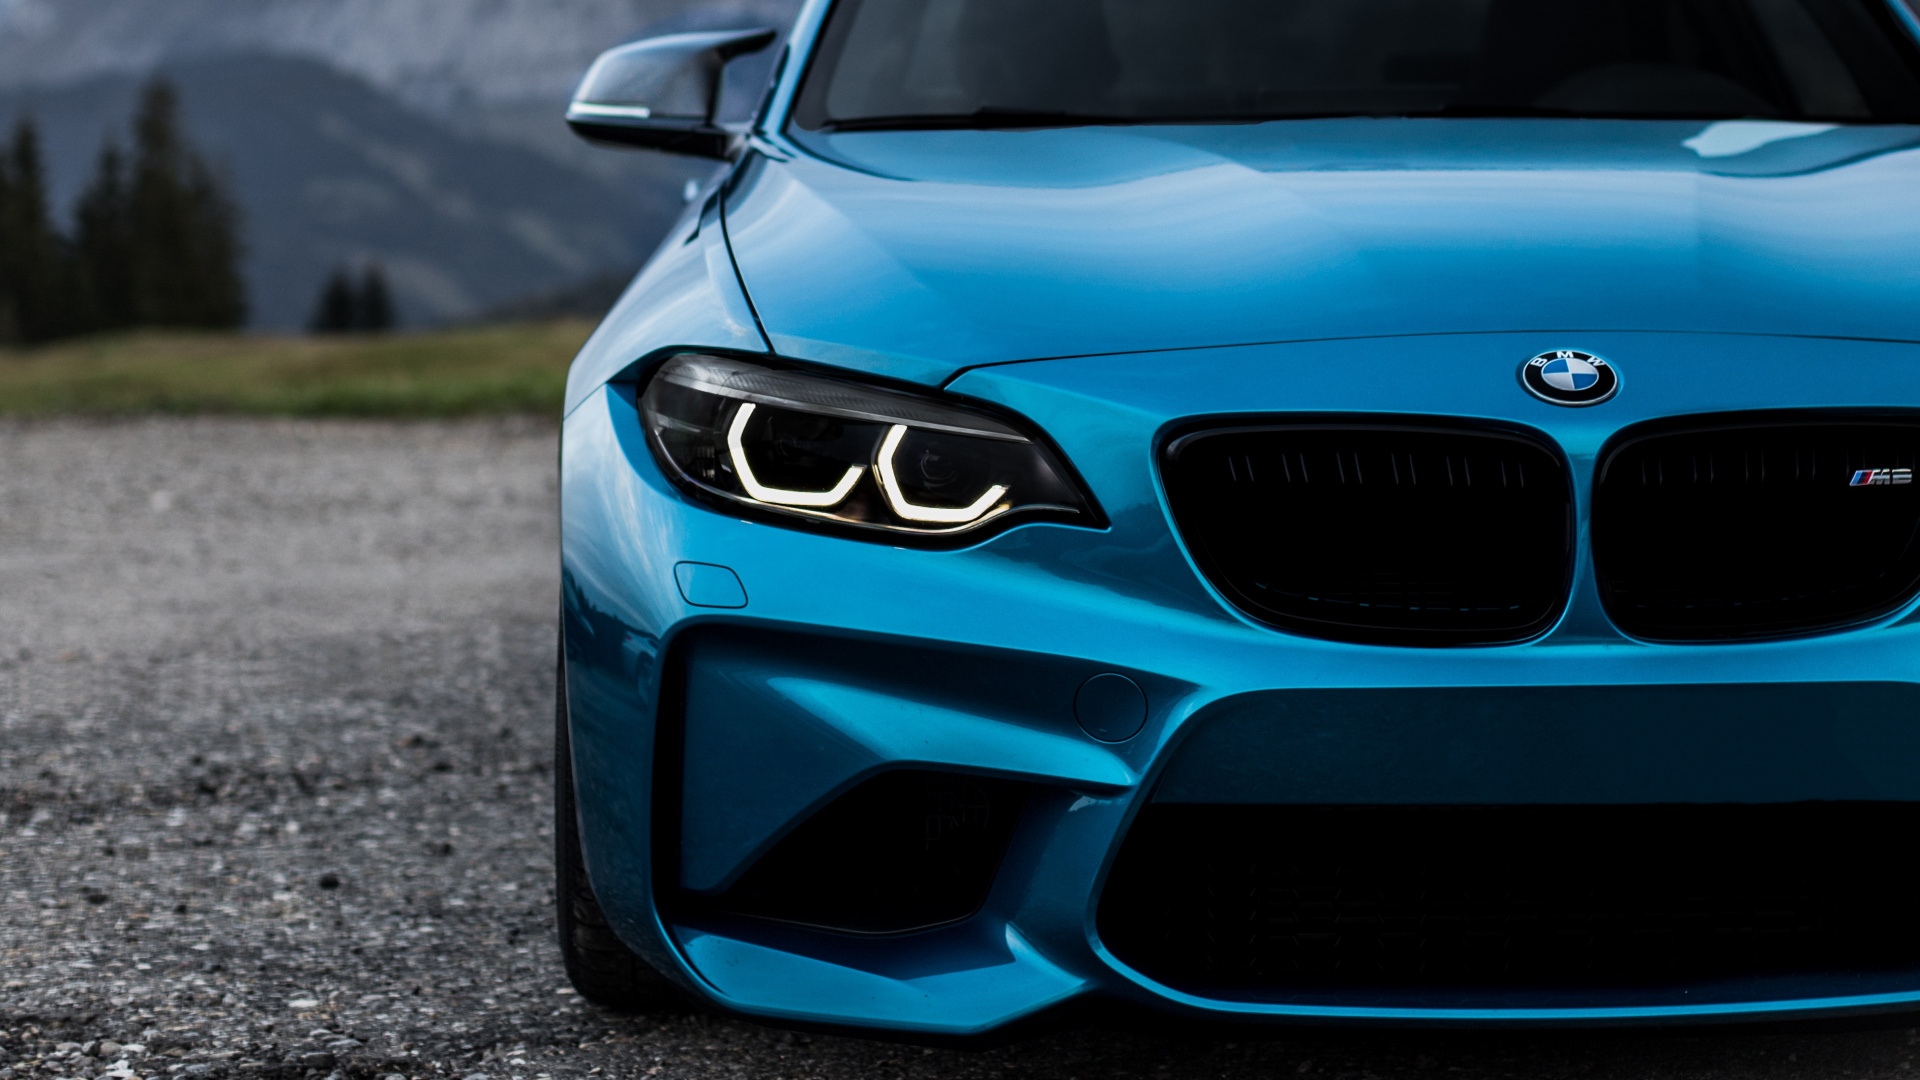 Blue Bmw m 3 on Road During Daytime. Wallpaper in 1920x1080 Resolution